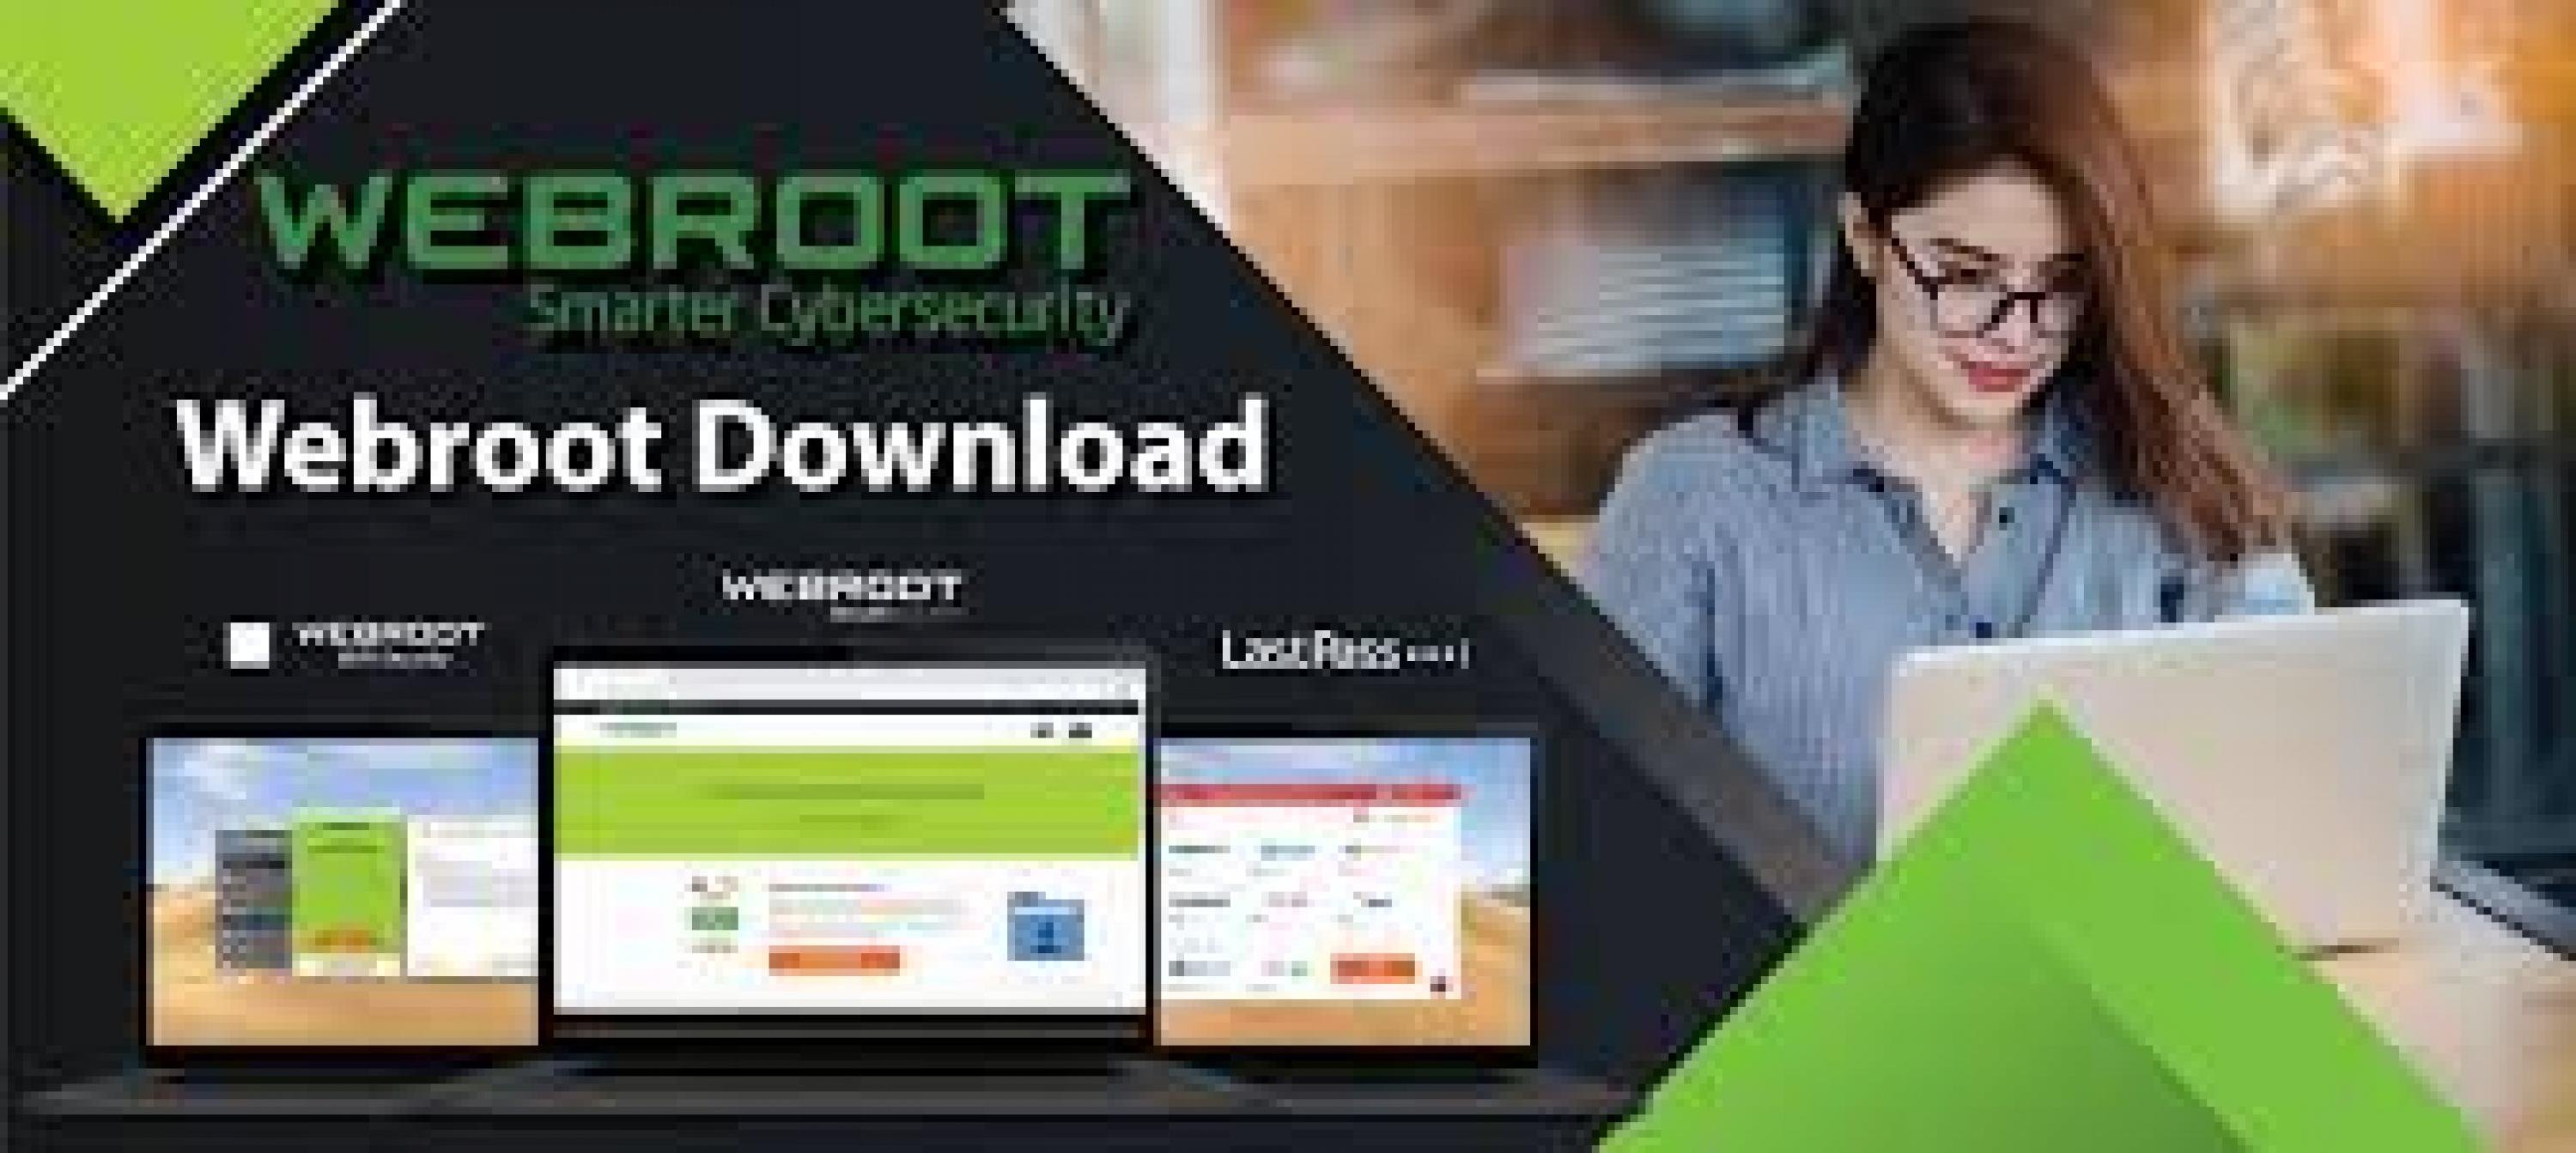 Webroot Download cover photo